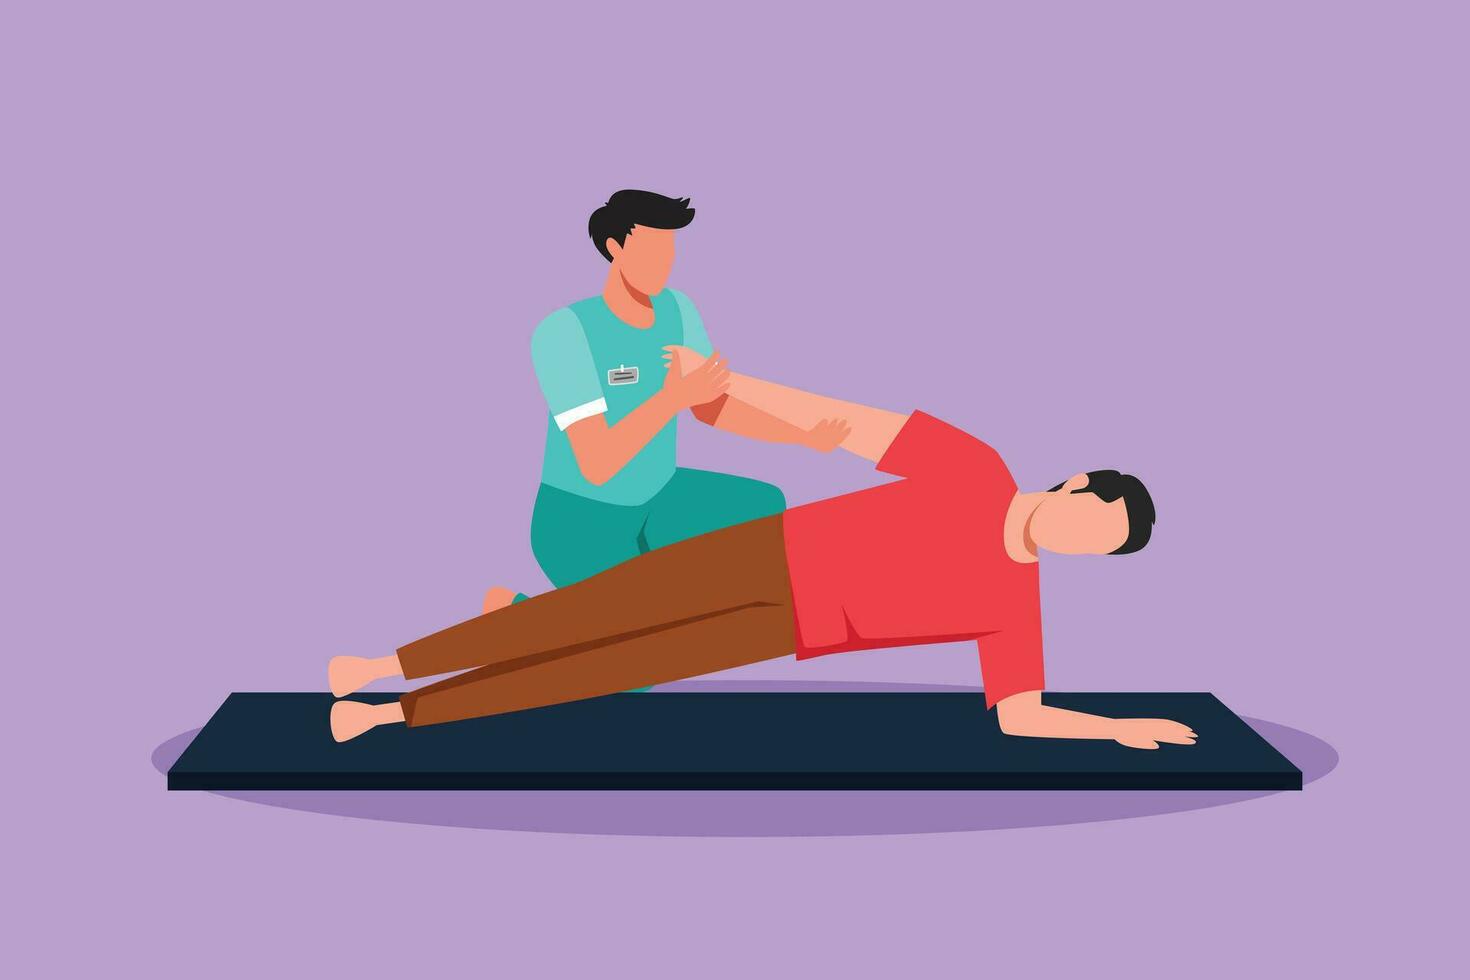 Cartoon flat style drawing of man patient lying on the floor masseur therapist doing healing treatment massaging patient body manual sport physical medical therapy. Graphic design vector illustration